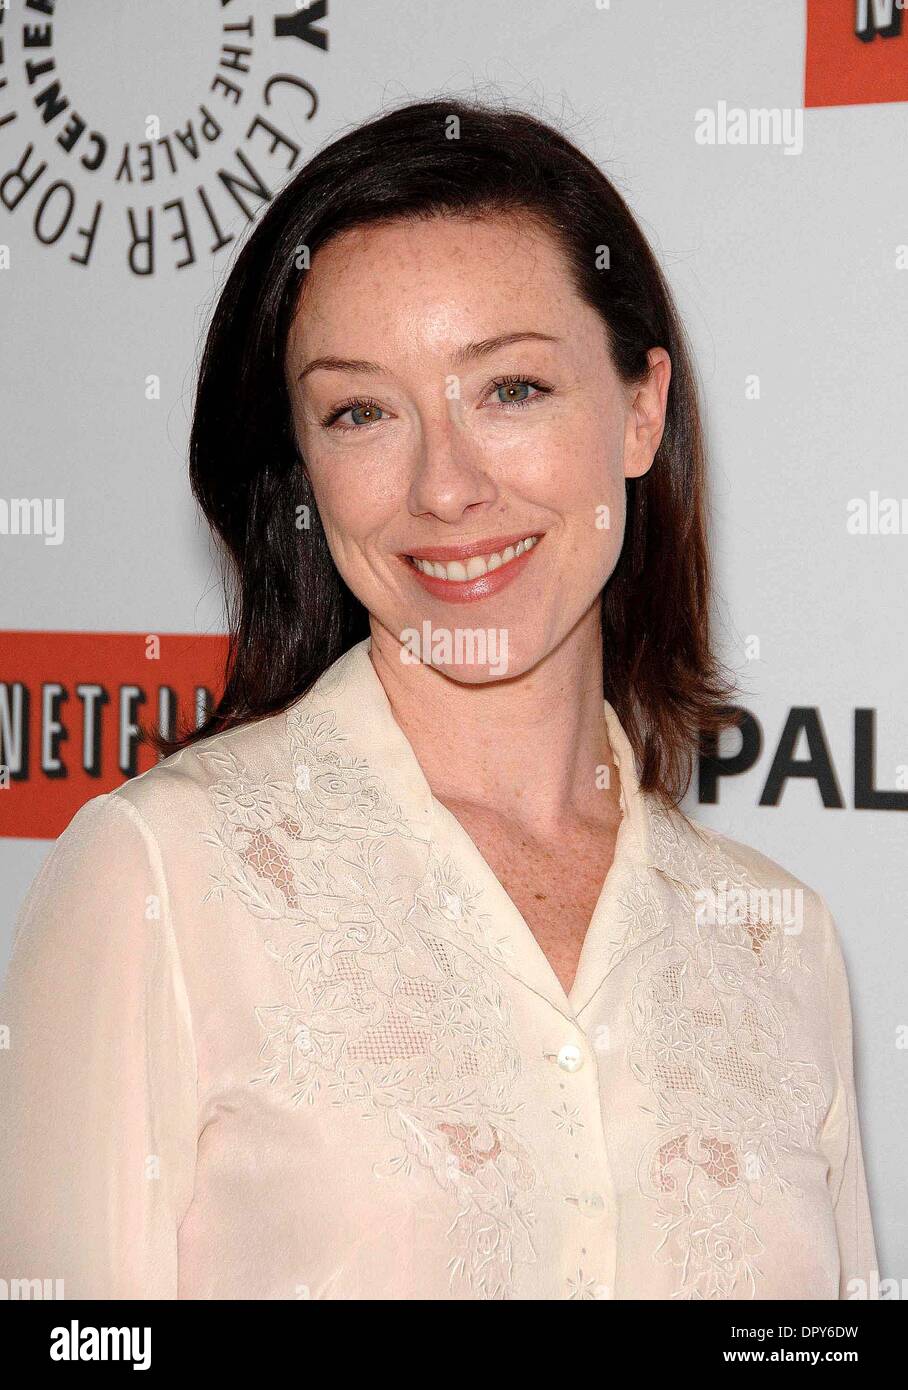 MOLLY PARKER during the 26th Annual William S. Paley Television Festival's hosting of Swingtown, held at the the Paley Center for Media, on April 24, 2009, in Beverly Hills, California..Photo: Michael Germana - Globe Photos.K61934MGE (Credit Image: © Michael Germana/Globe Photos/ZUMAPRESS.com) Stock Photo